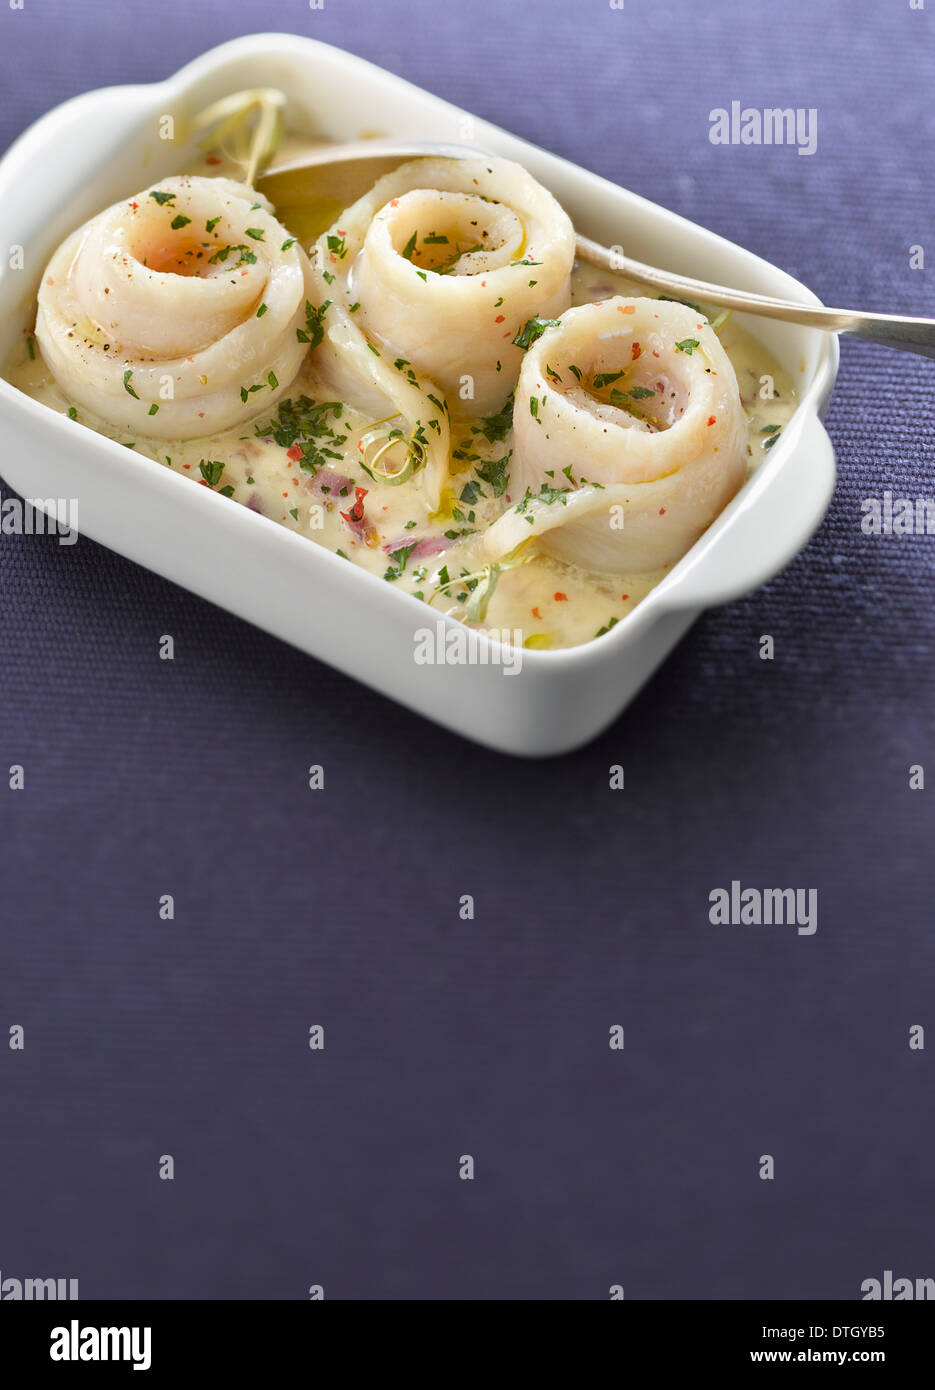 Sole fillets in creamy beer sauce Stock Photo